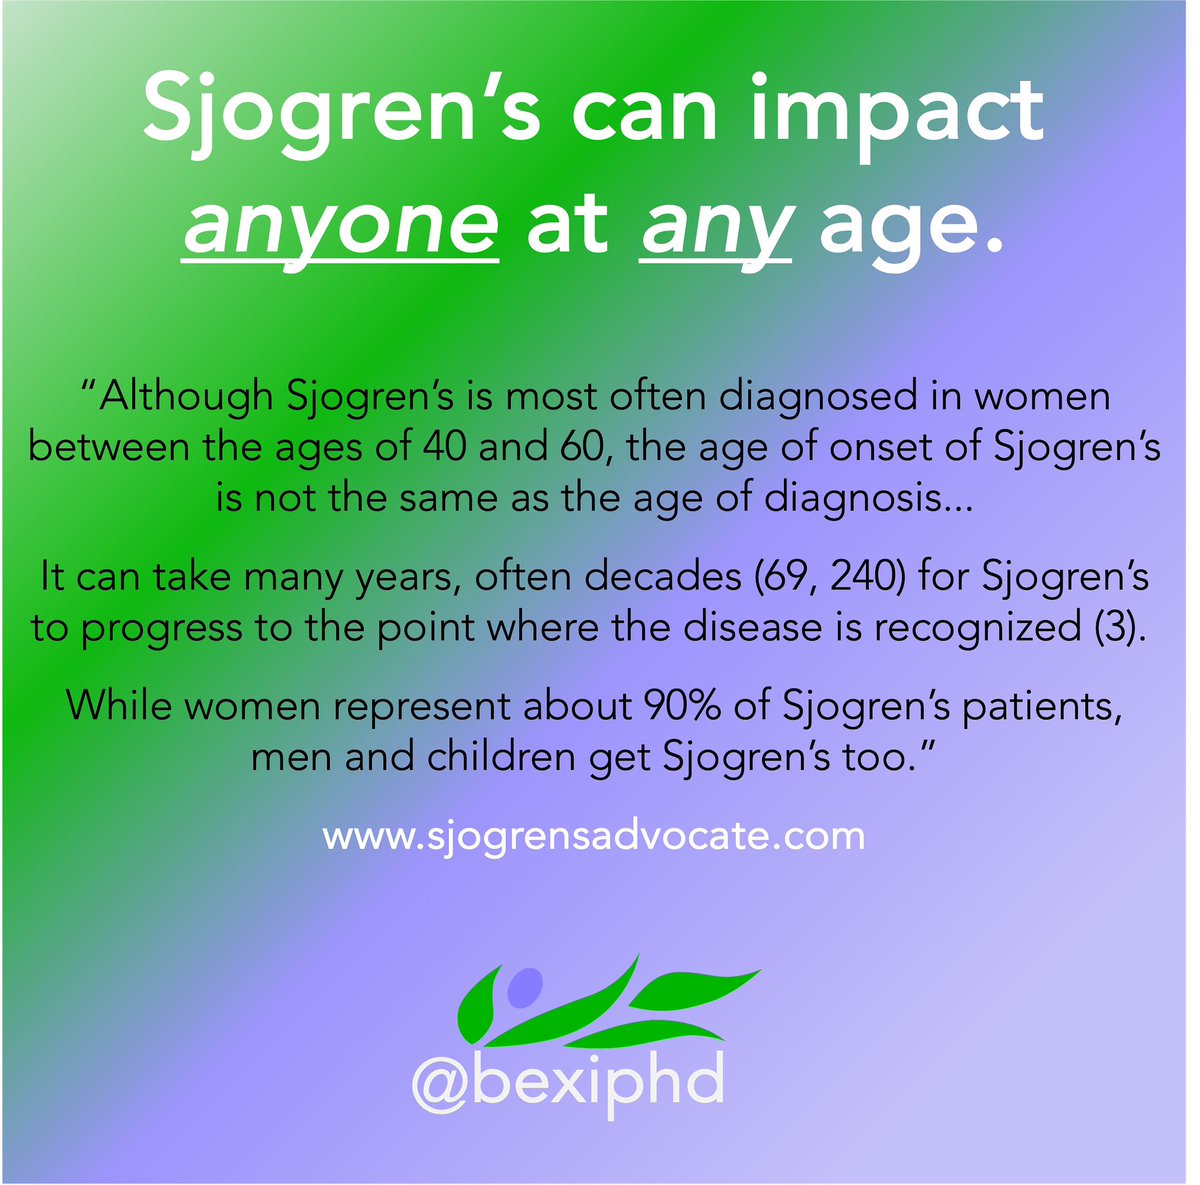 April is Sjogren's awareness month. There are lots of myths about Sjogren's in the medical community and public that are barriers to diagnosis and care. Please help me advocate for Sjogren's this month by interacting with, commenting on, and sharing my posts.